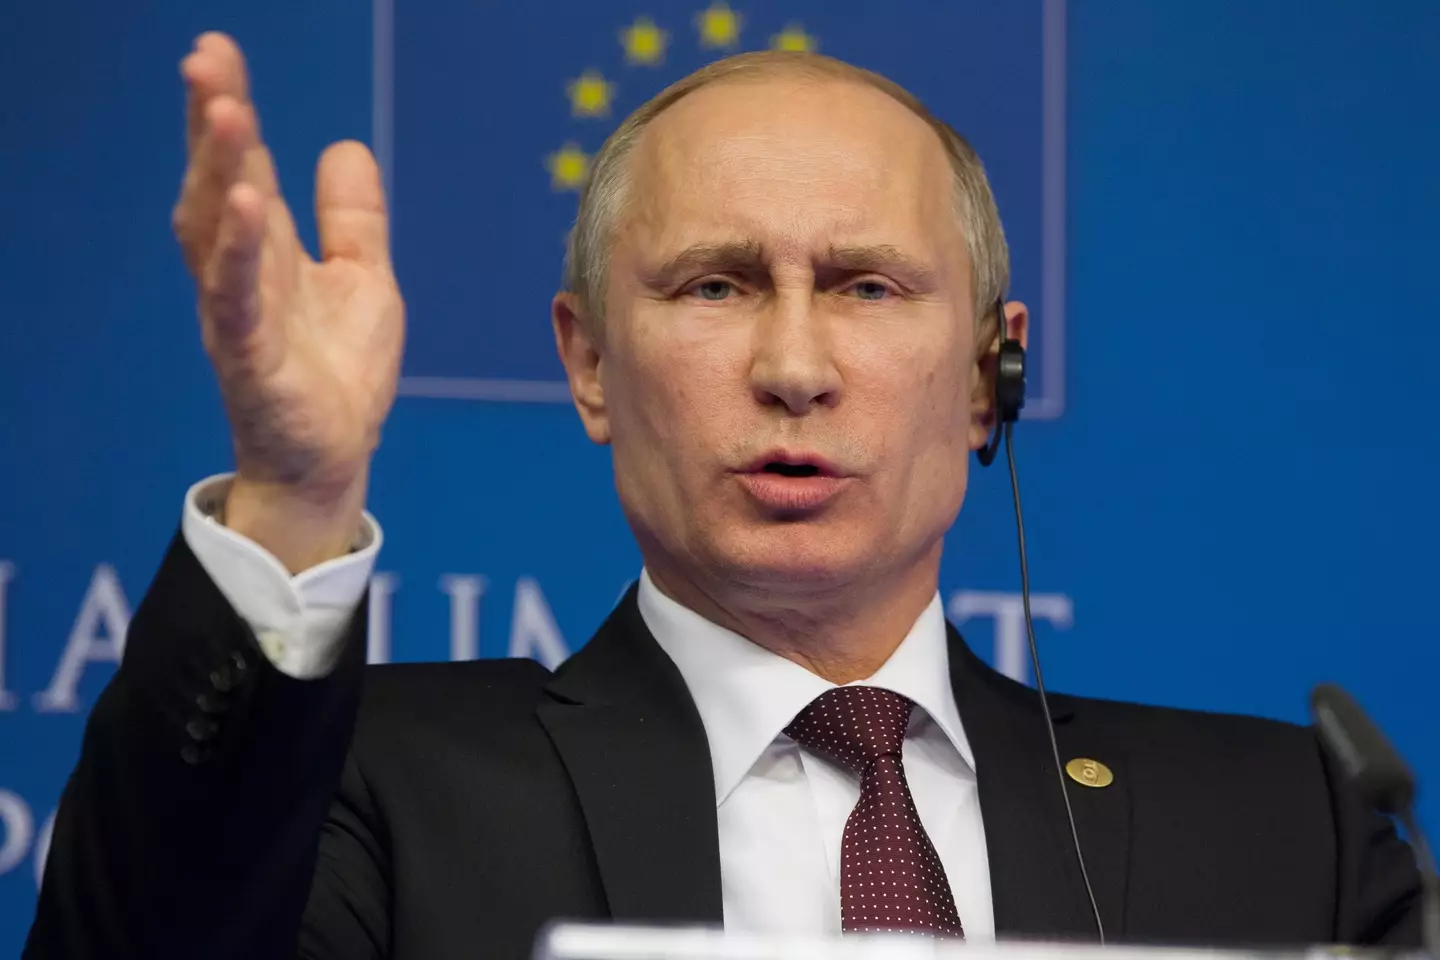 Vladimir Putin has used the threat of nuclear weapons since his country's invasion of Ukraine in February.